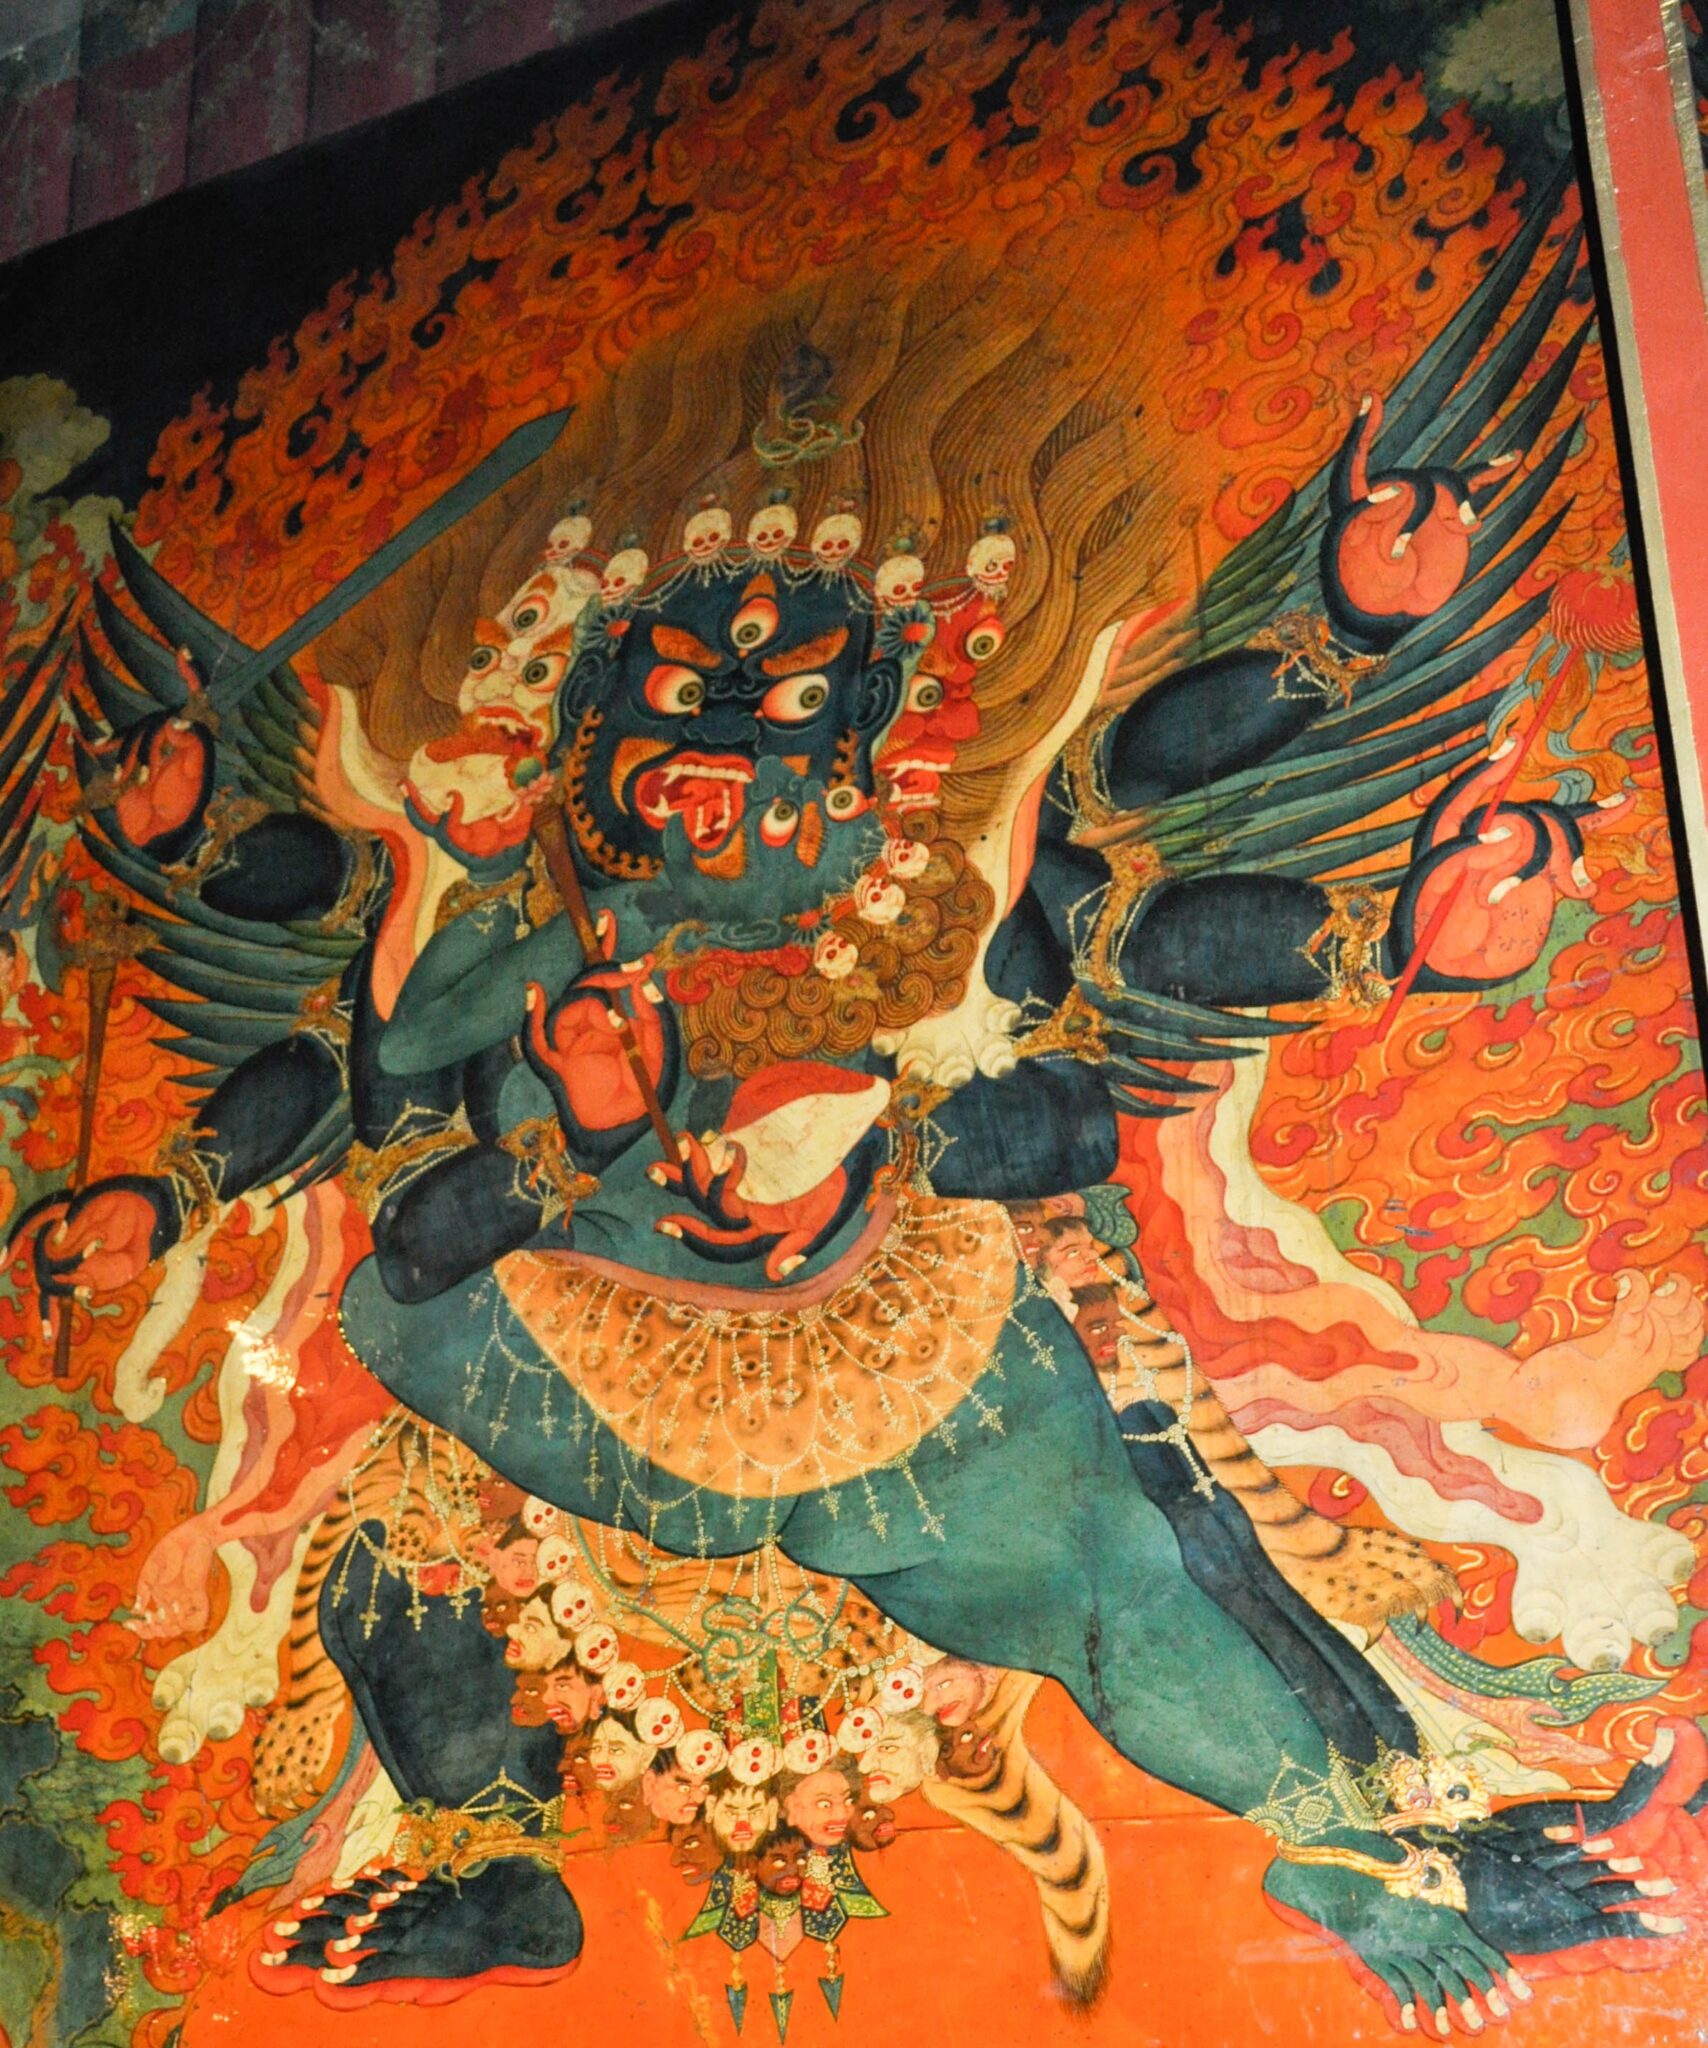 Mural depicting blue-skinned wrathful deity and his consort locked in embrace; both wear skull crowns